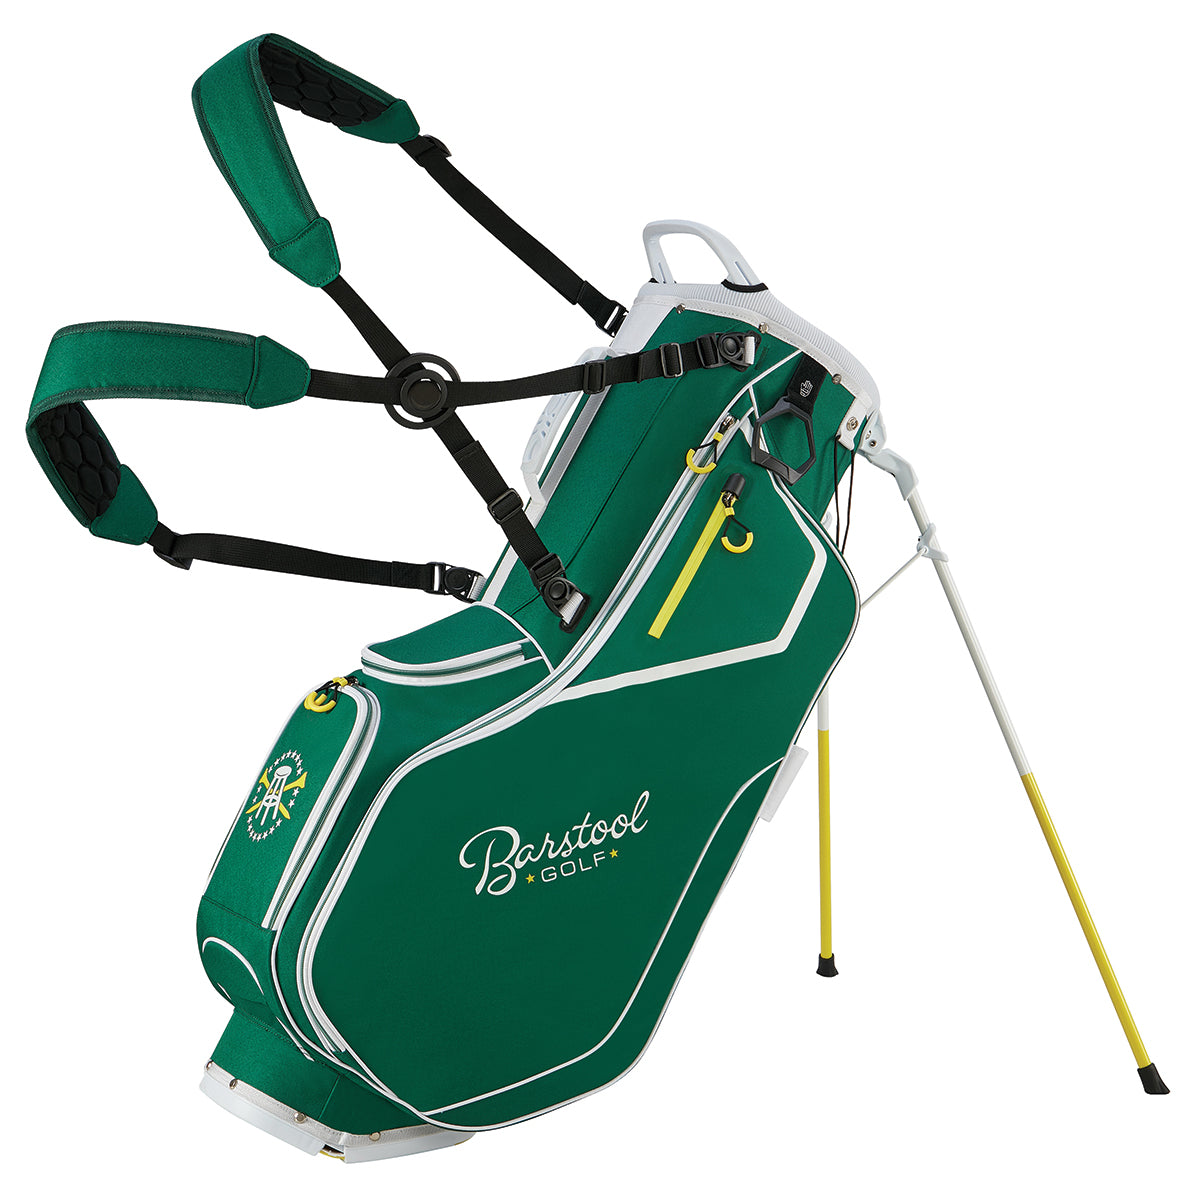 Barstool Golf Green Bag - Fore Play Accessories Merch – Barstool